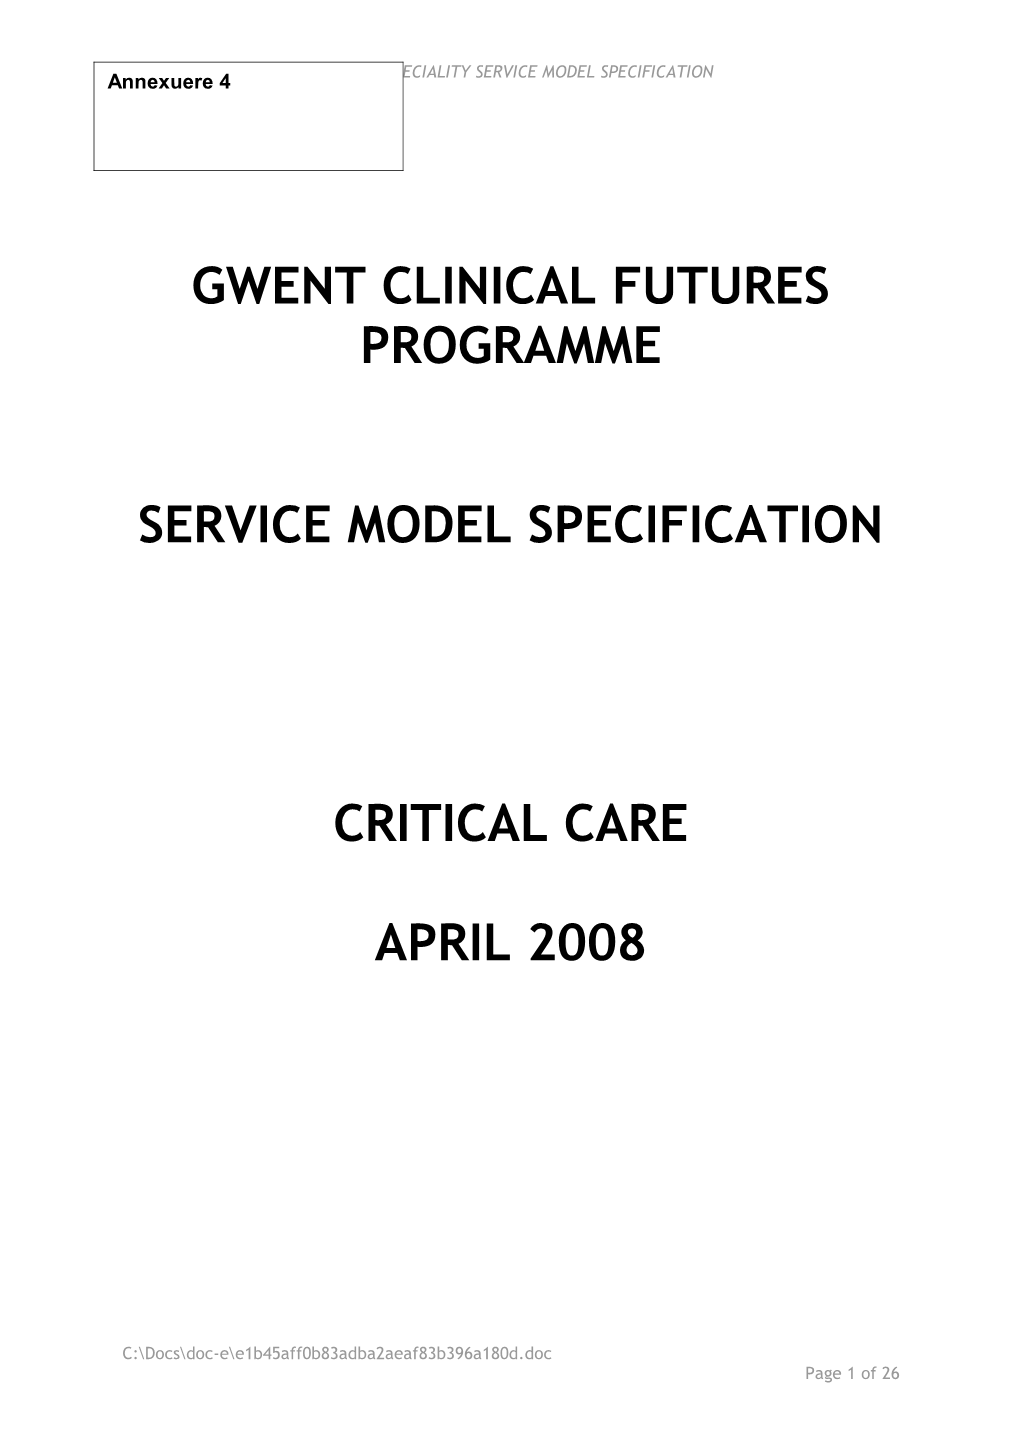 Clinical Futures Programme Speciality Service Model Specification